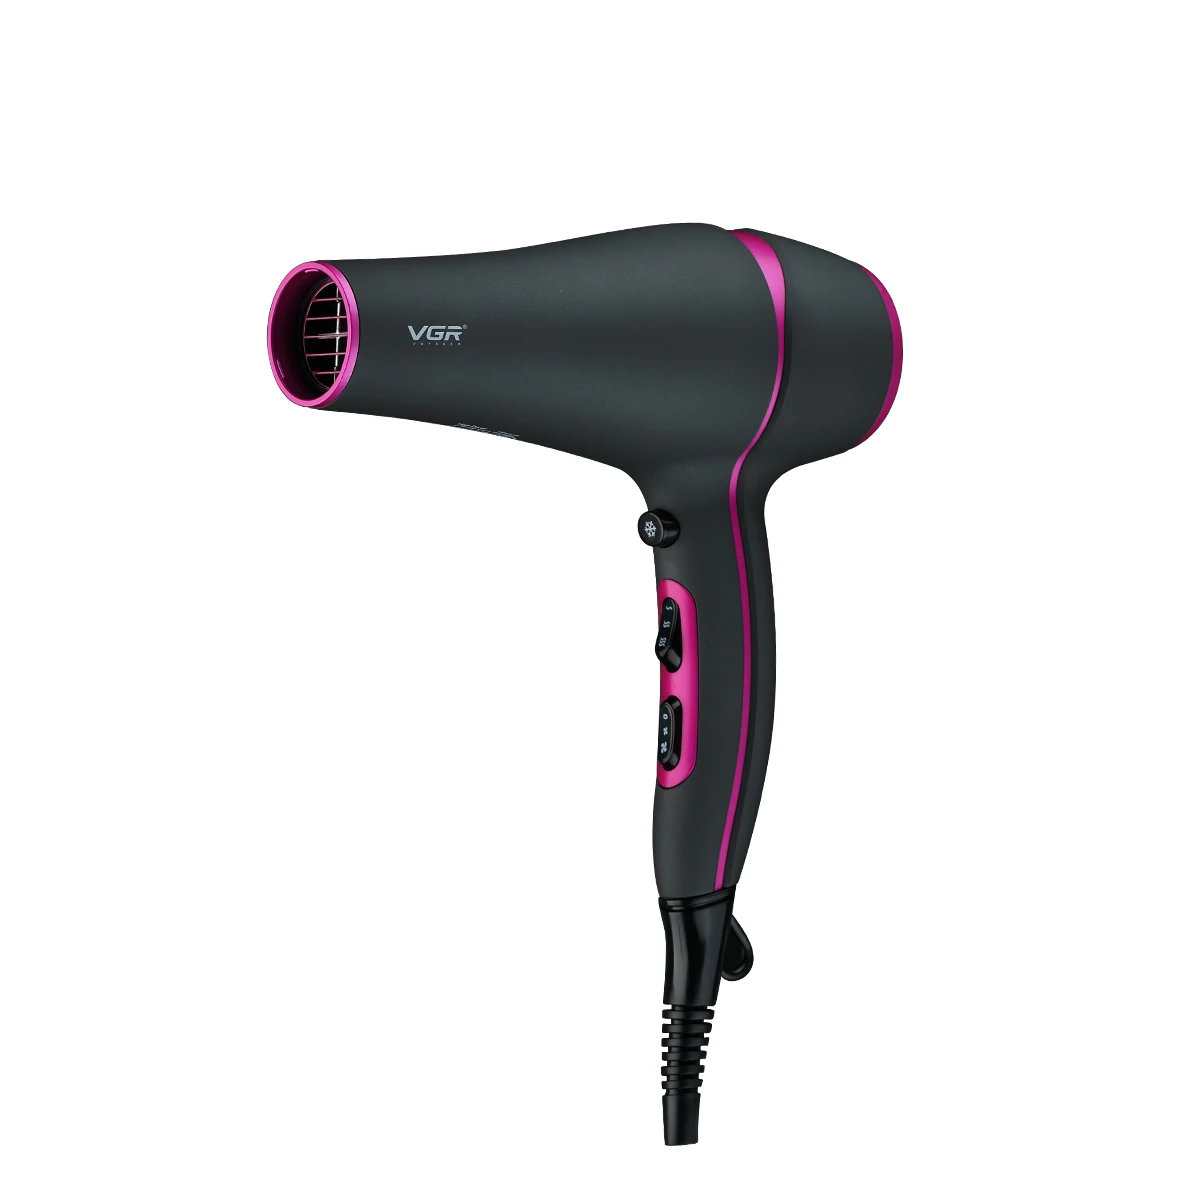 

VGR V-402 barber shop equipment powerful professional electric salon hair dryer with 2 speed settings